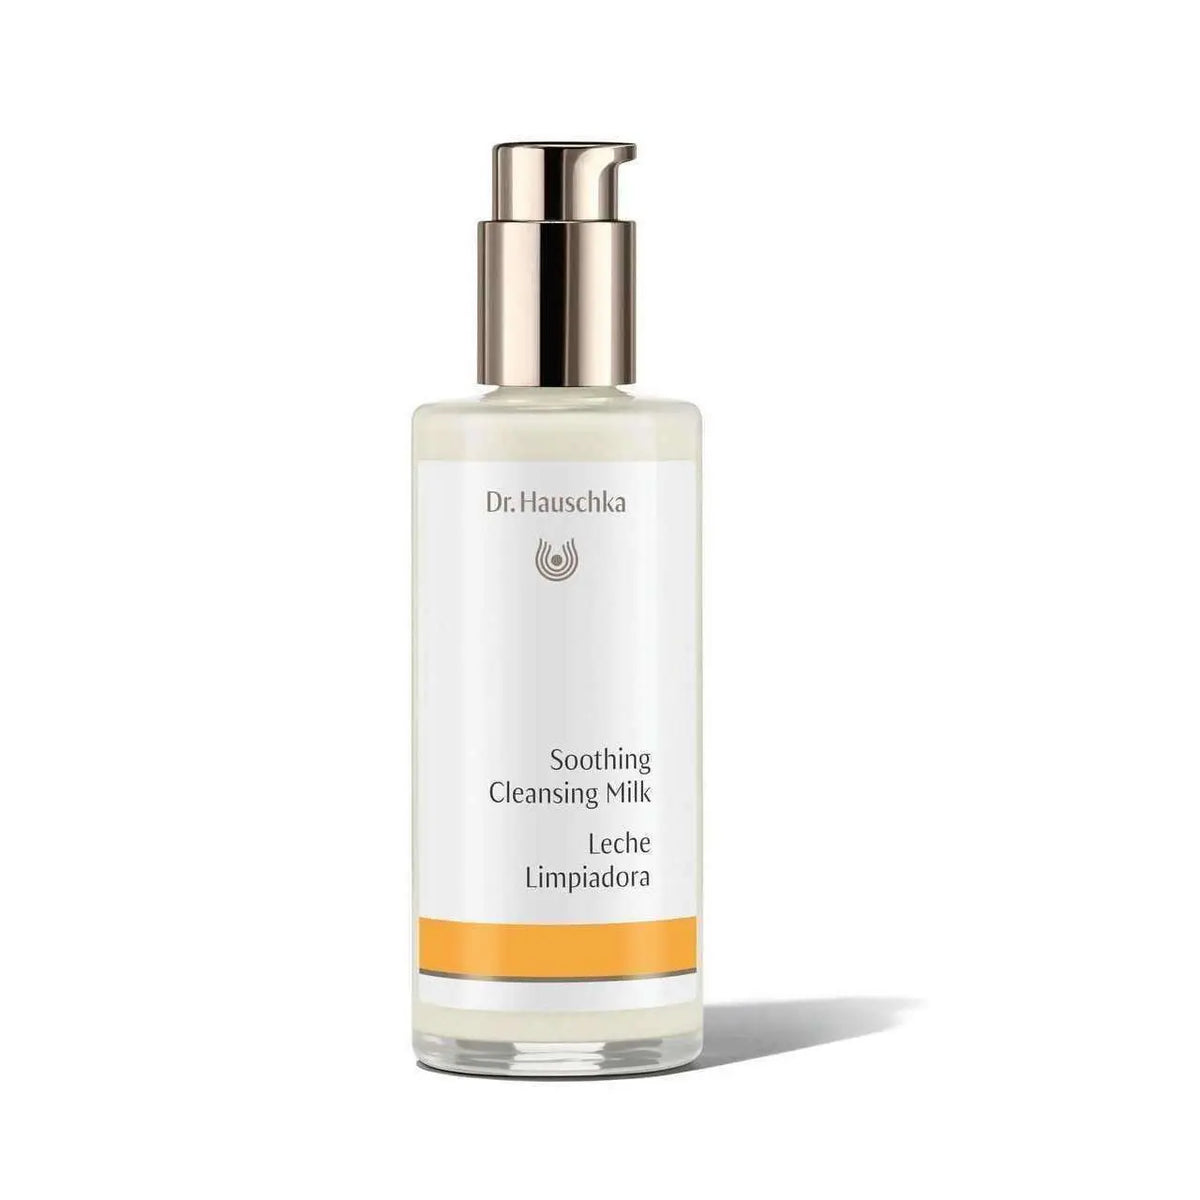 Dr. HAUSCHKA Soothing Cleansing Milk 10ml (Trial Size) % | product_vendor%